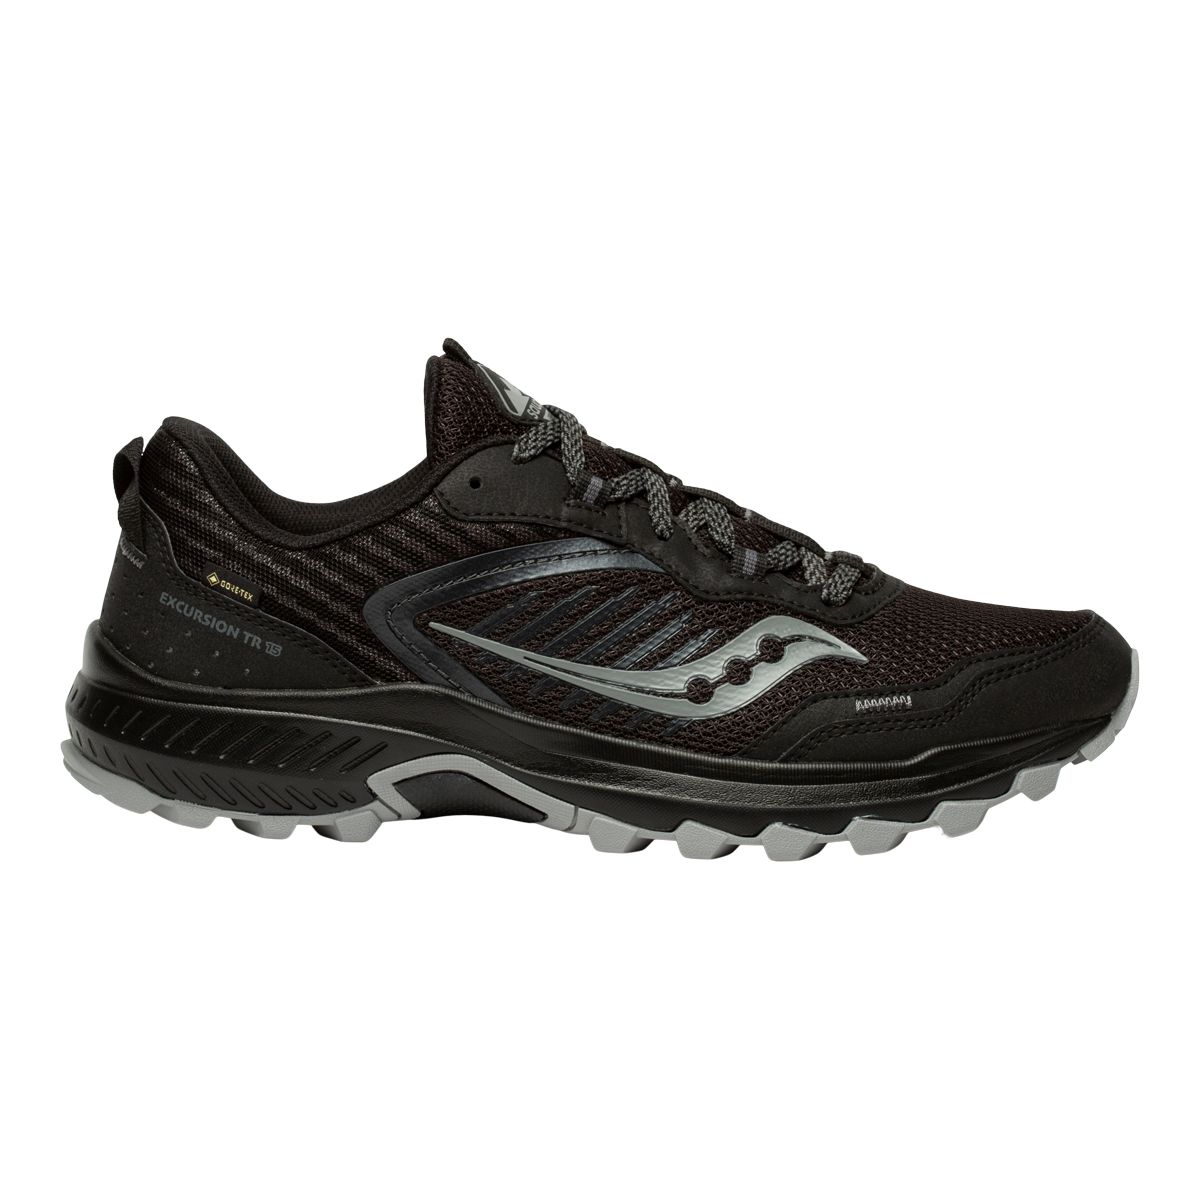 Saucony Men's VR Excursion TR15 Trail Running Shoes, Hiking, Training ...